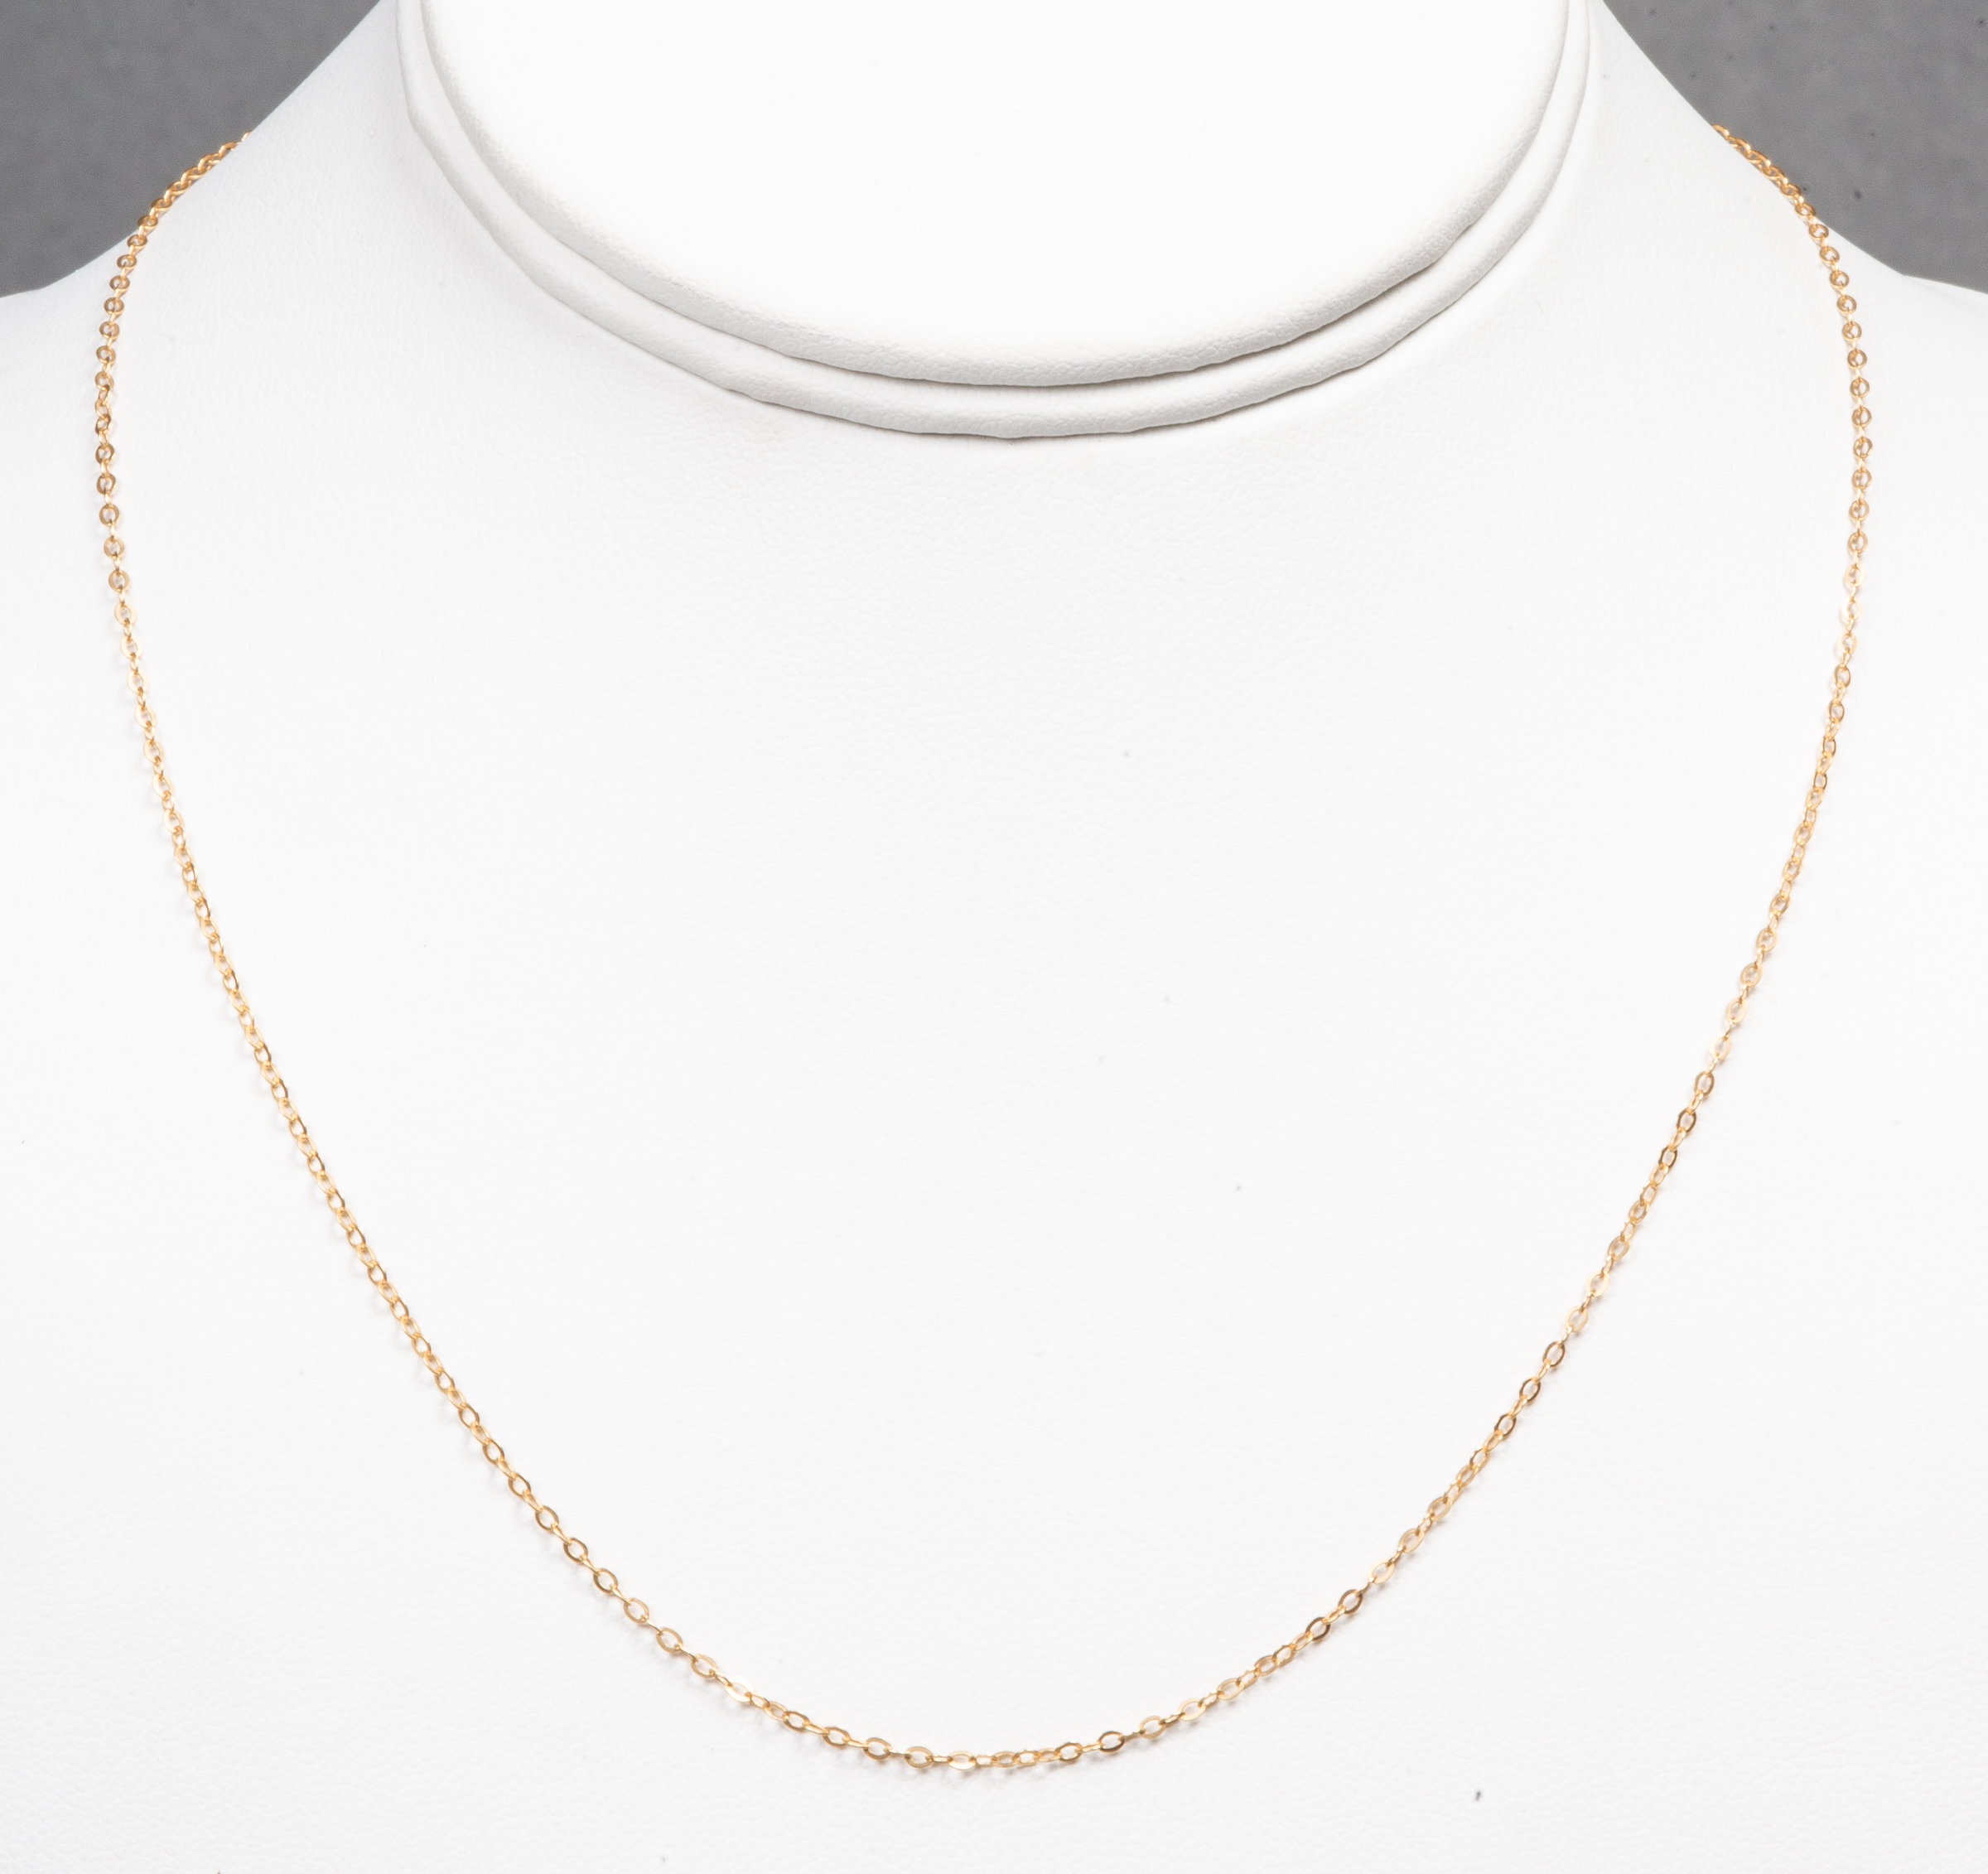 10K YELLOW GOLD CABLE CHAIN NECKLACE 363e1c